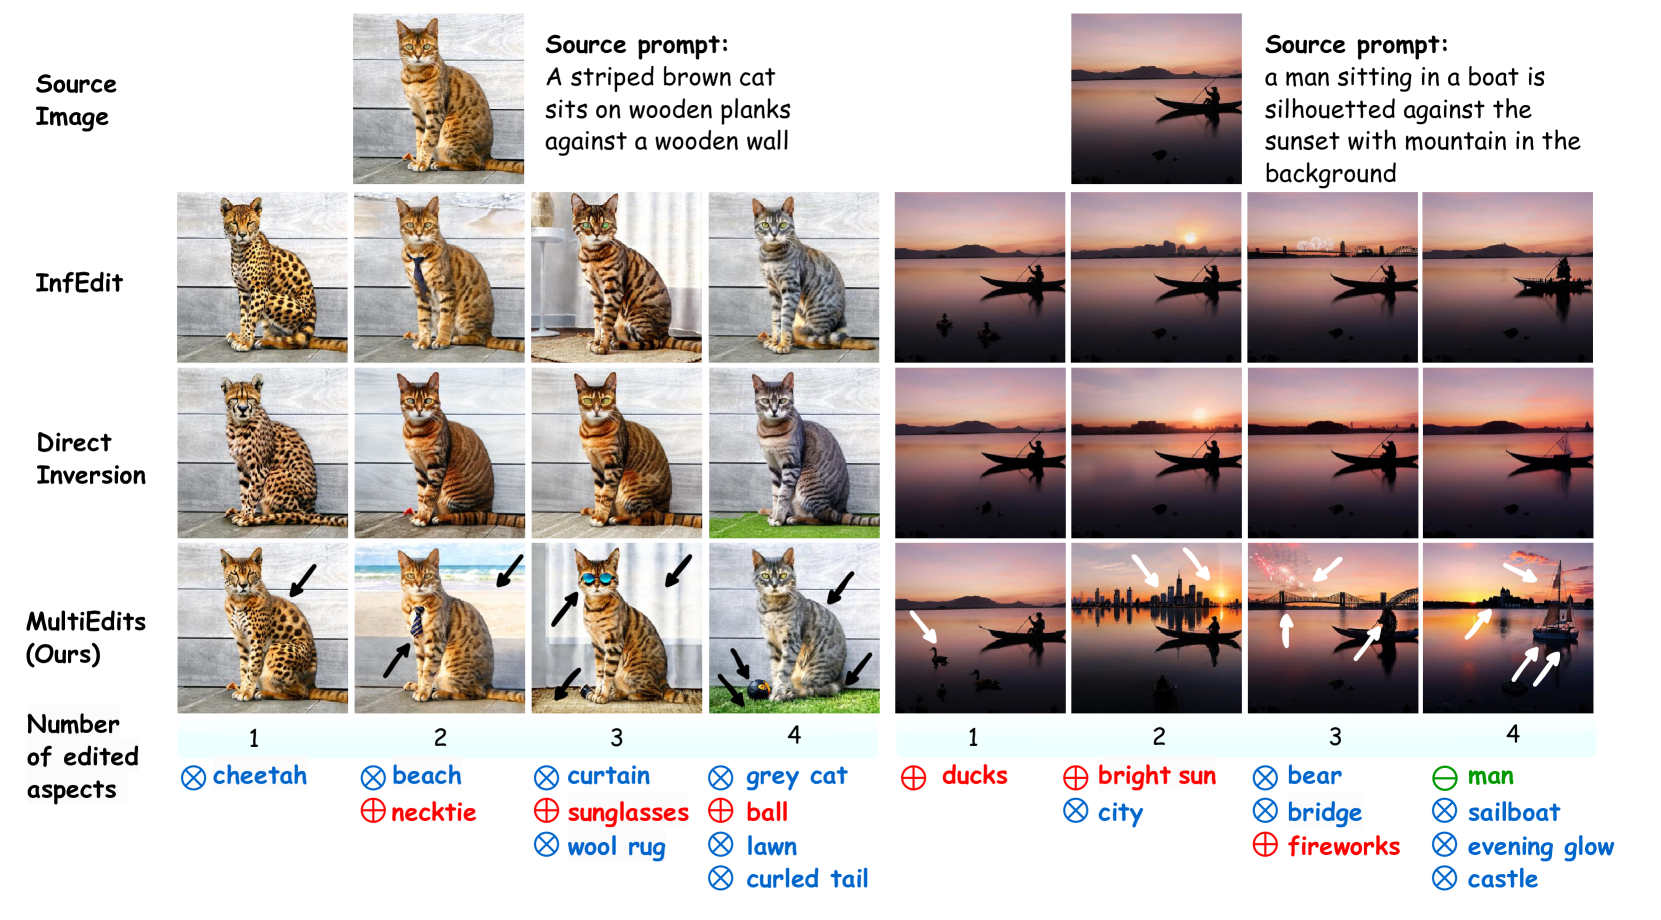 MultiEdits: Simultaneous Multi-Aspect Editing with Text-to-Image Diffusion Models